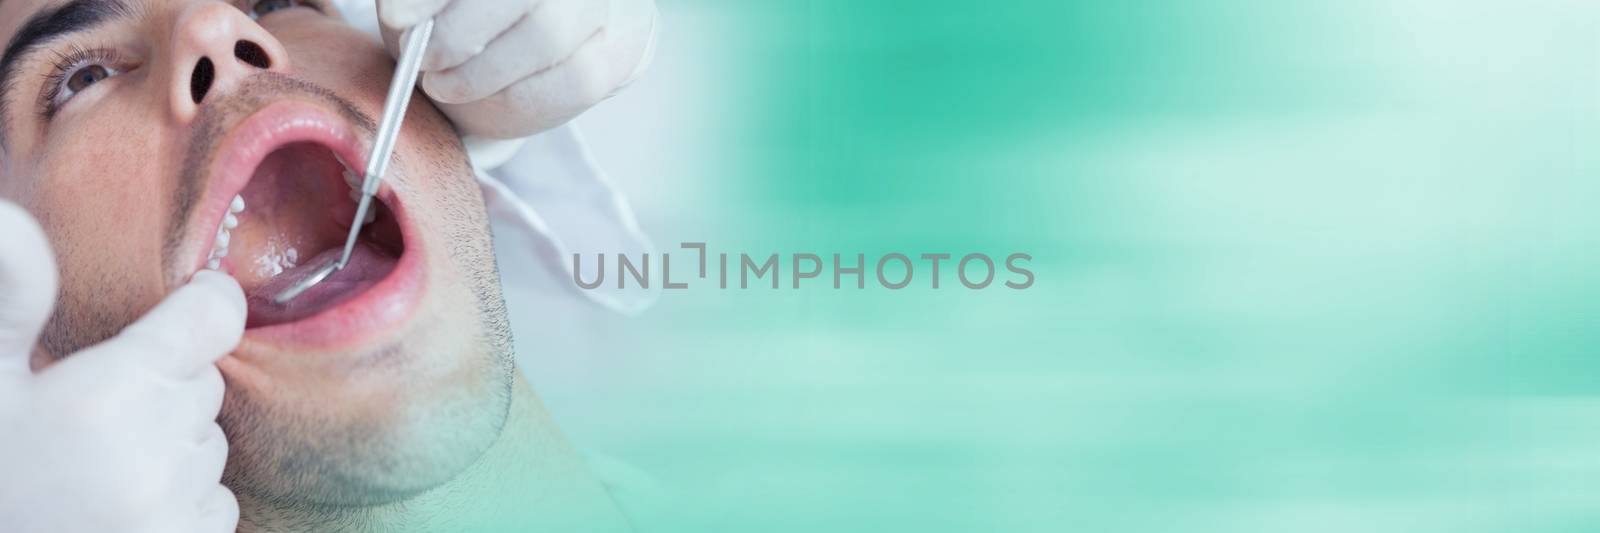 Digital composite of Close up of dentist working on patient and blurry teal transition